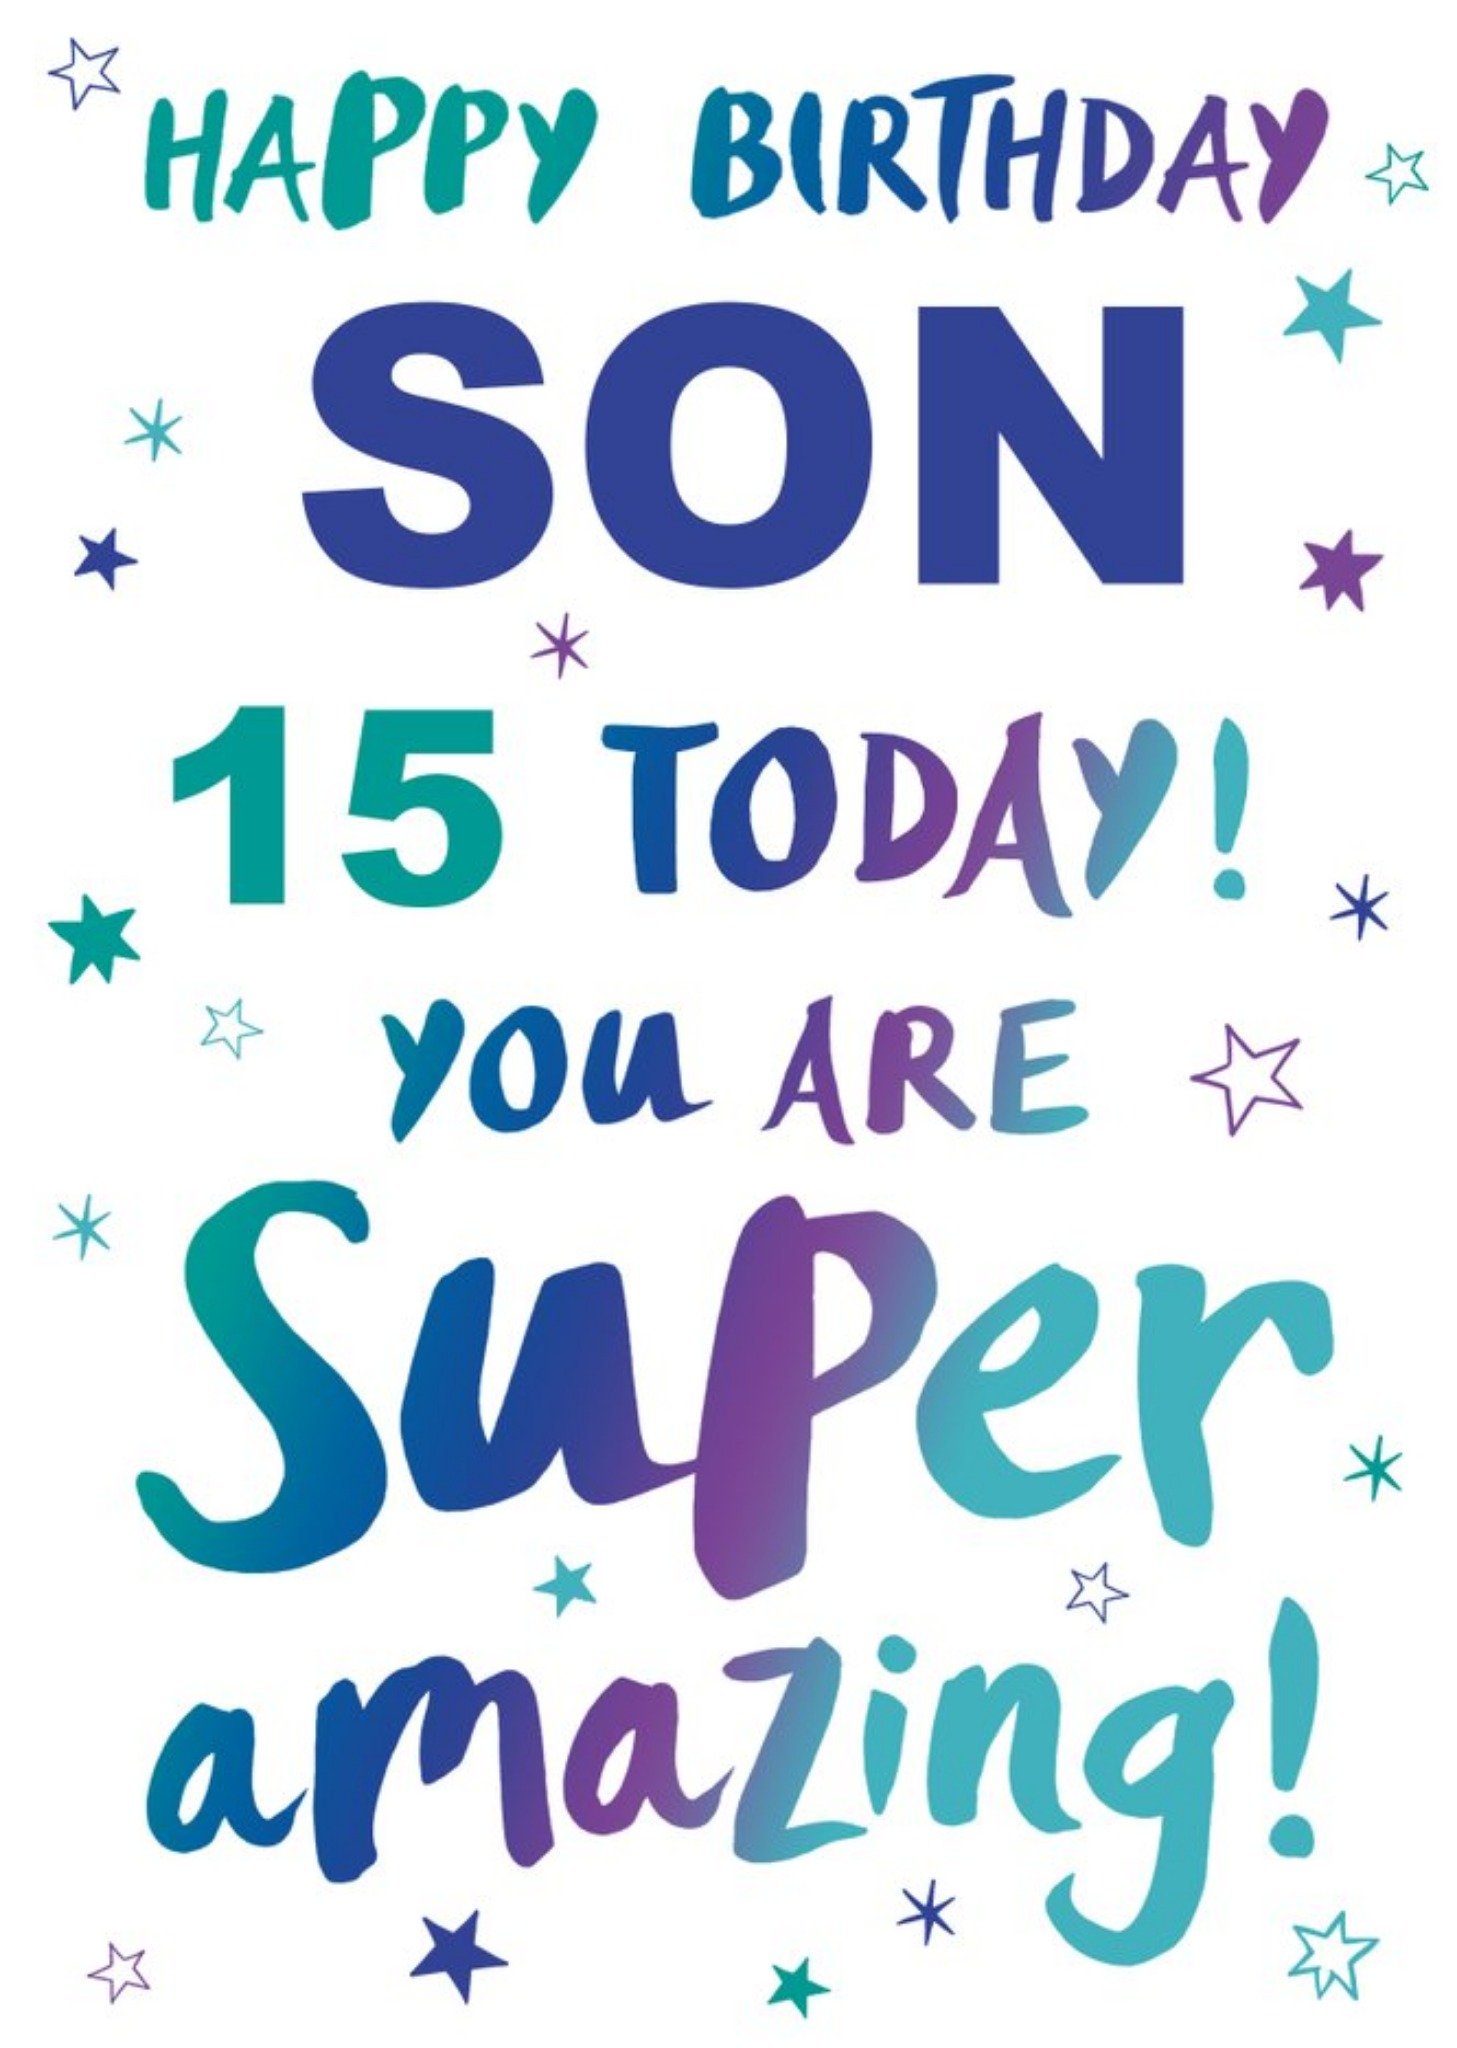 Moonpig Happy Birthday Son 15 Today You Are Super Amazing Card Ecard